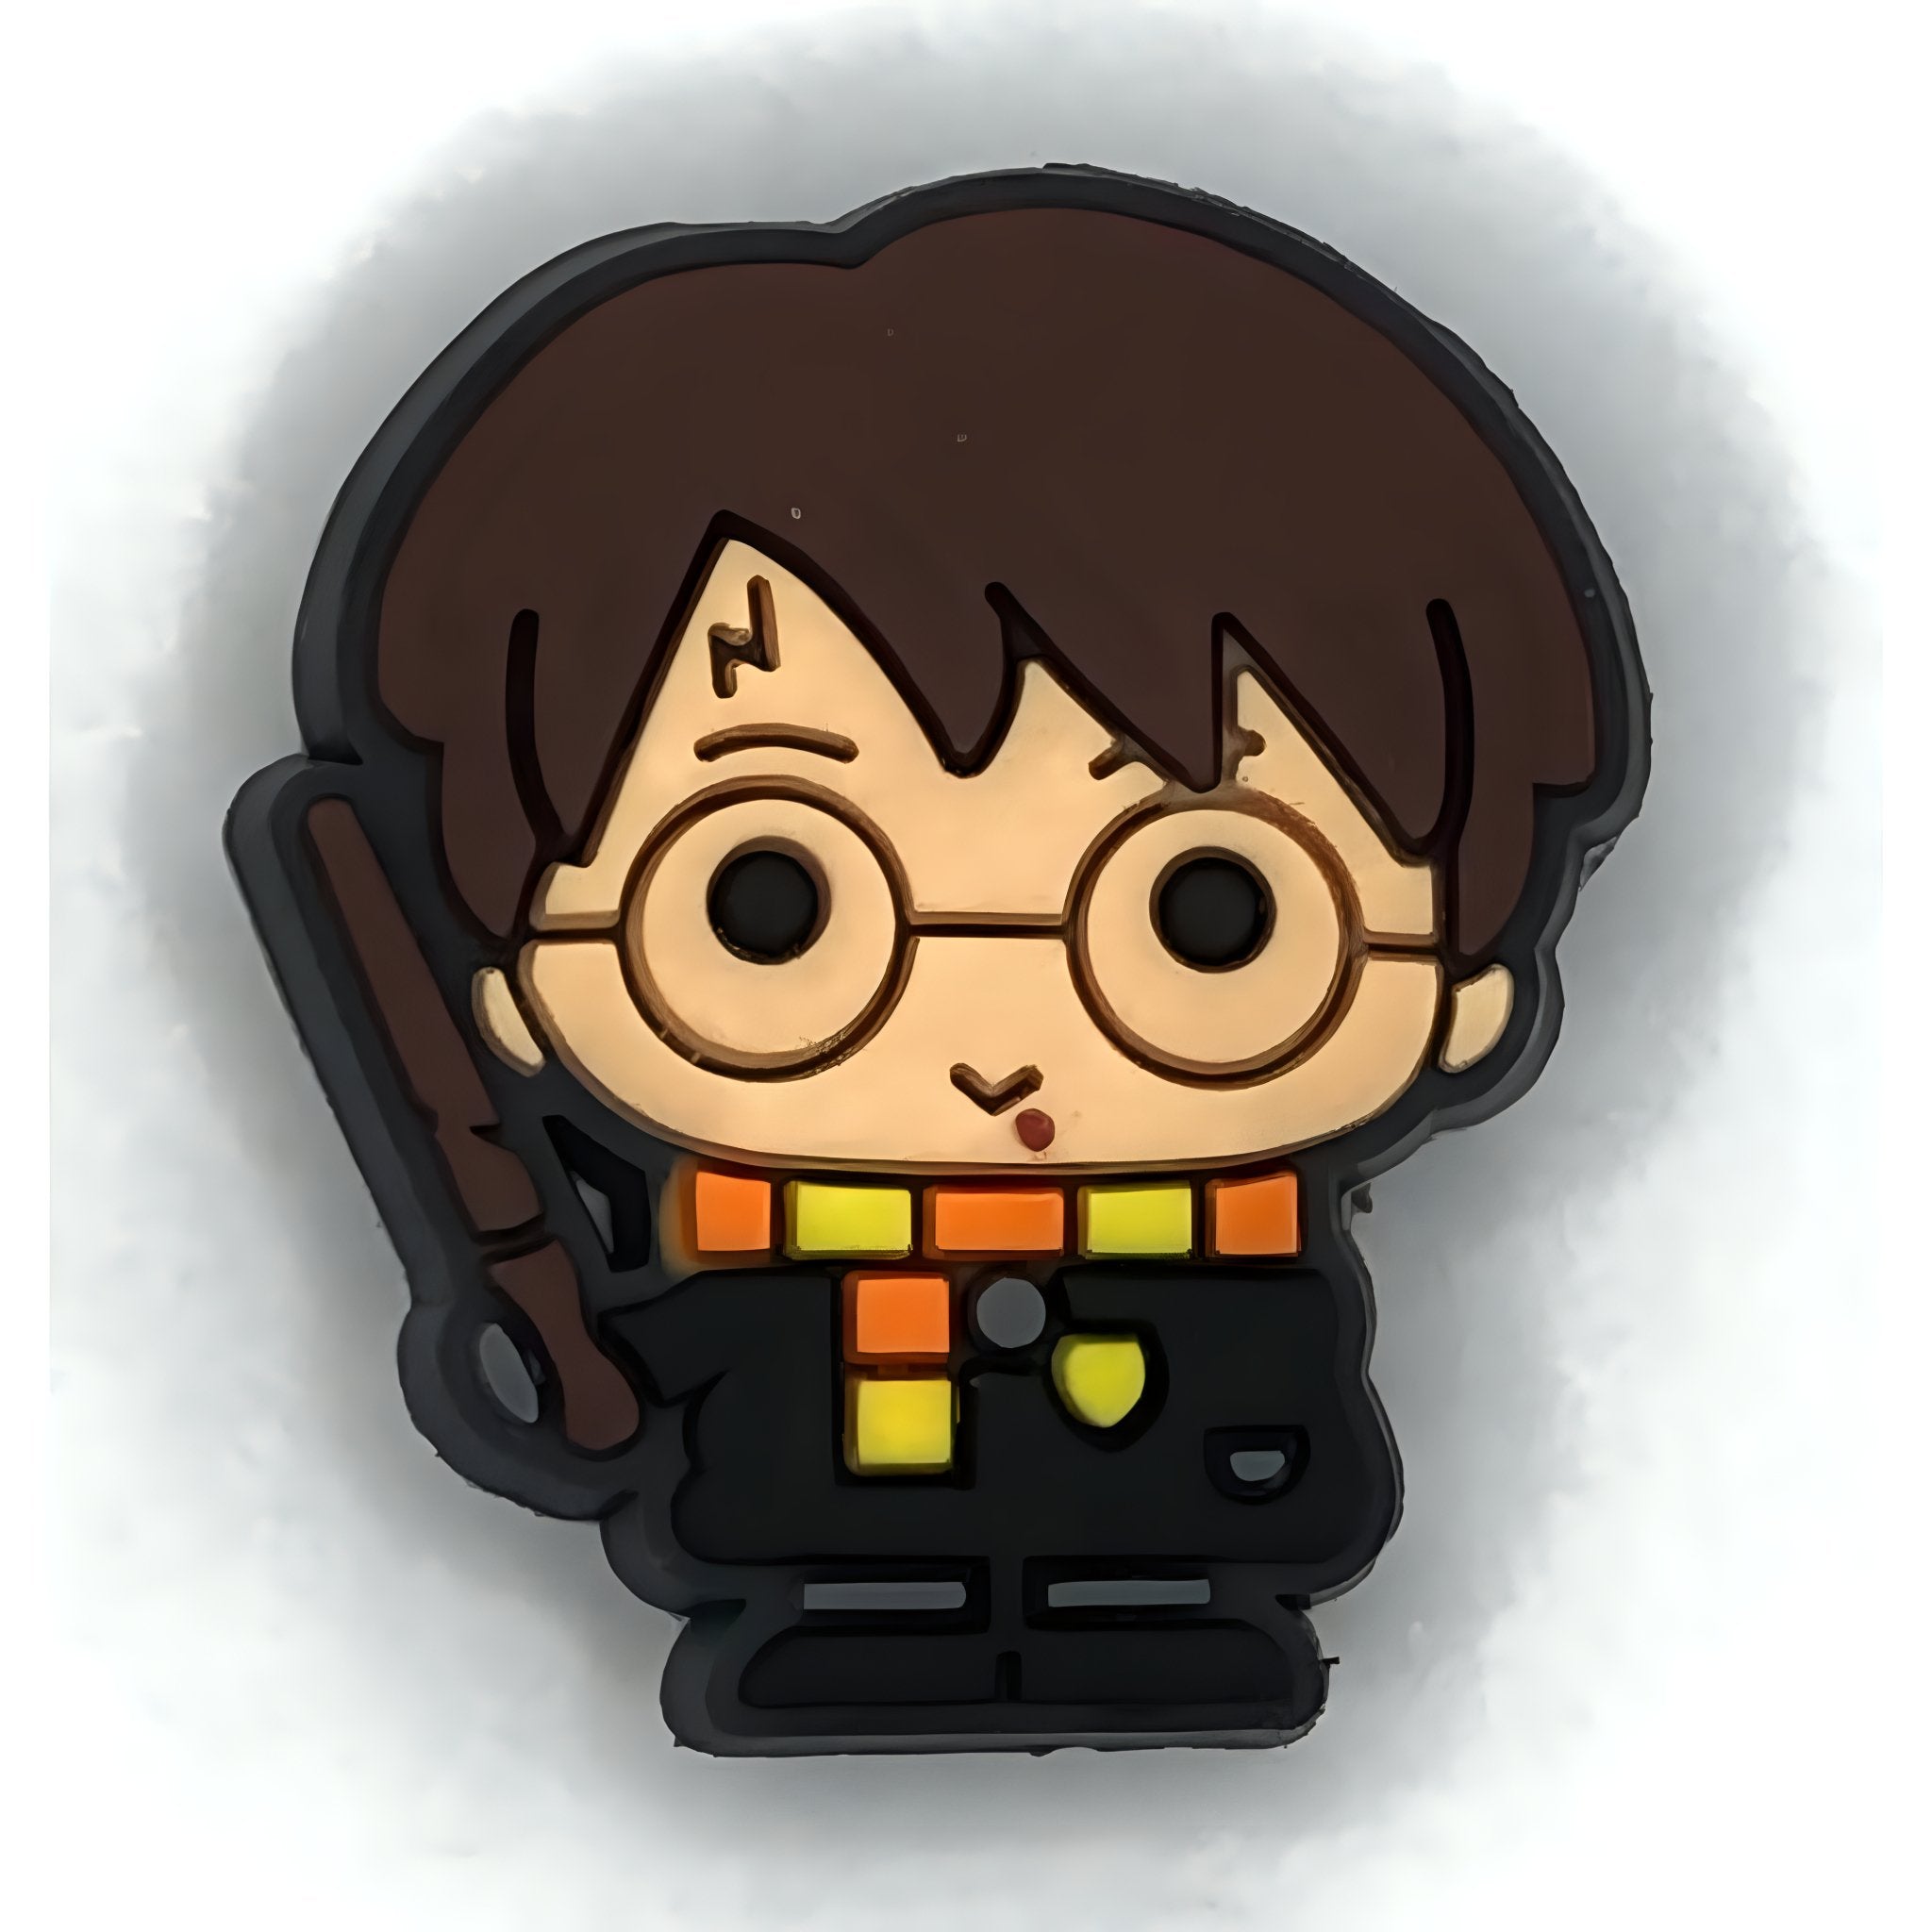 Harry Potter Charms Style Figurine